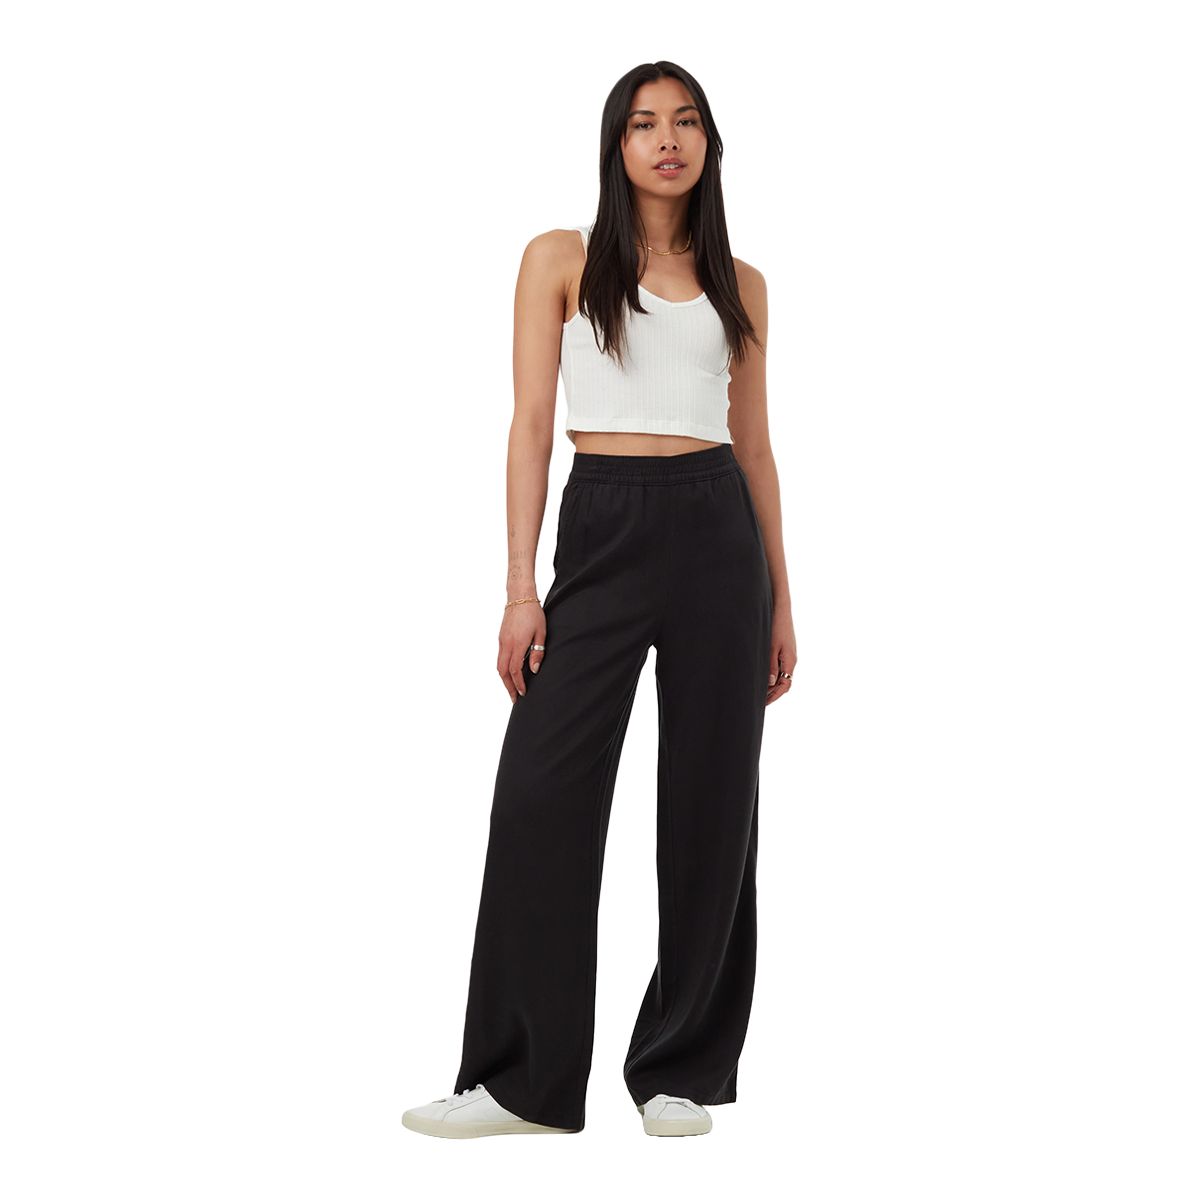 Wide Leg Pants With a High Waist in Tencel and Organic Cotton Stretch  French Terry, Ready to Ship, Various Sizes, Black, Charcoal -  Canada